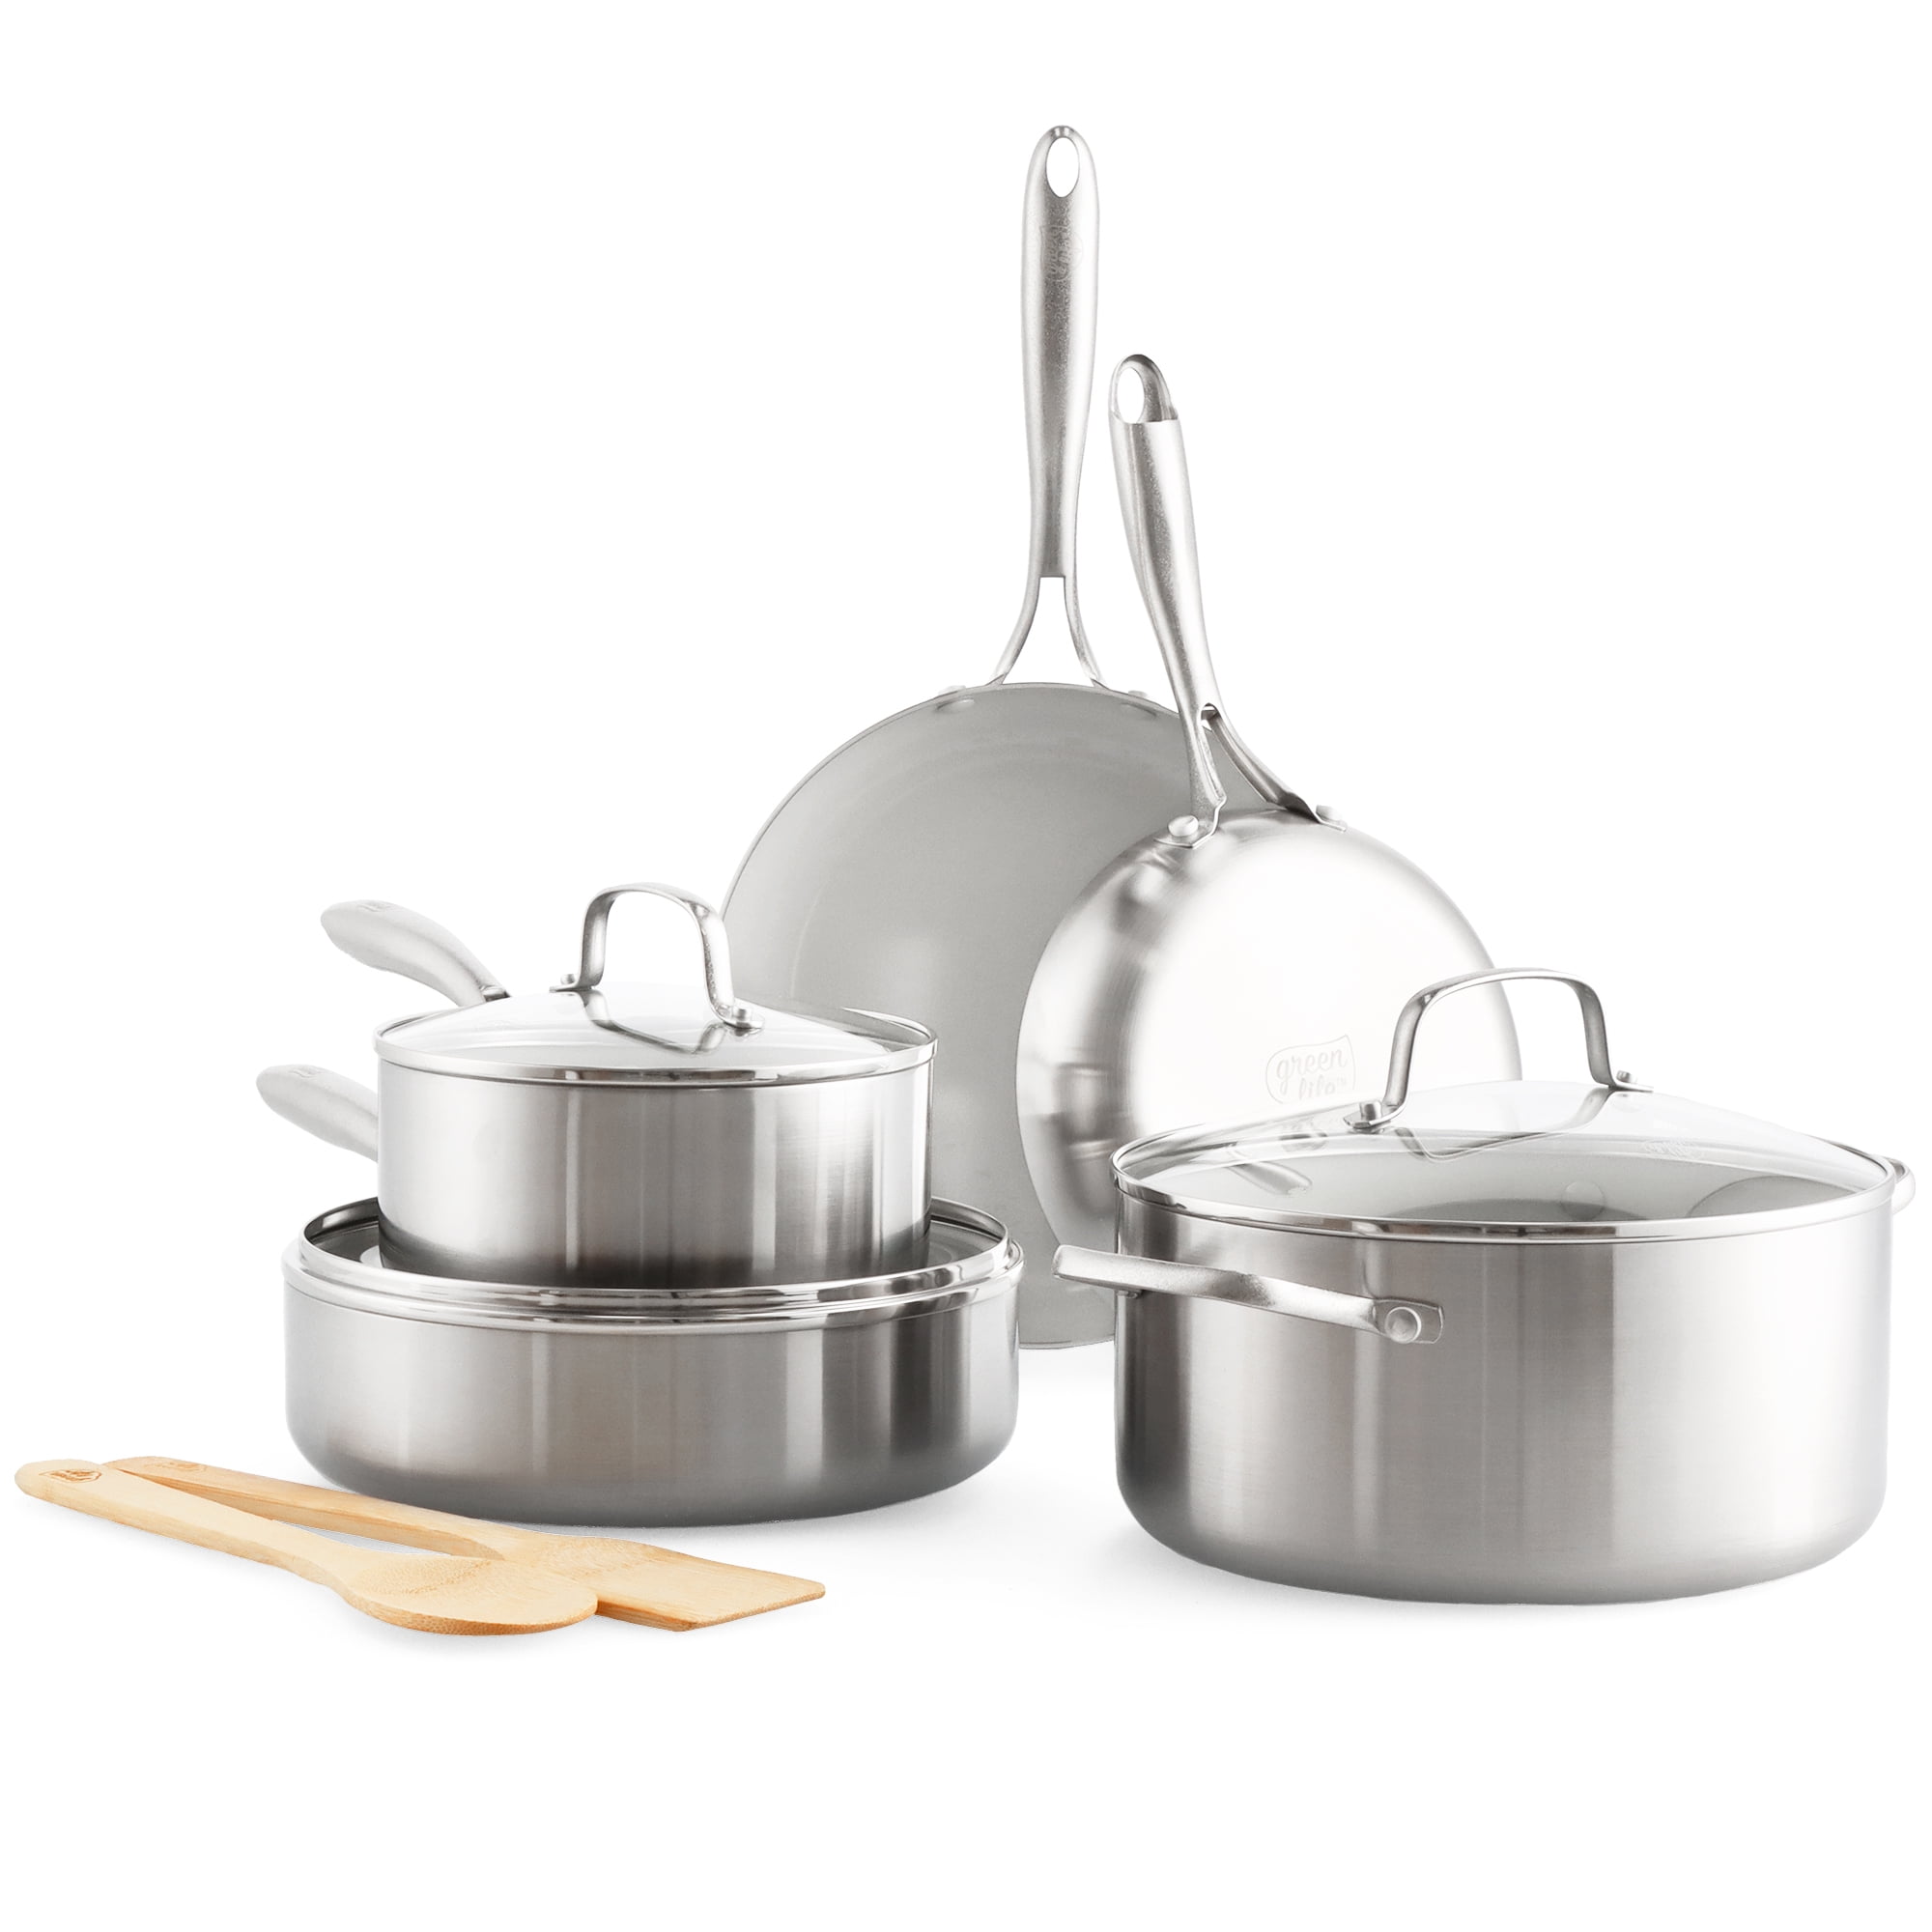 Legend 3 Ply 10 pc Stainless Steel Pots & Pans Set | Professional Quality  Cookware Clad for Home Cooking & Commercial Kitchen Surface Induction &  Oven